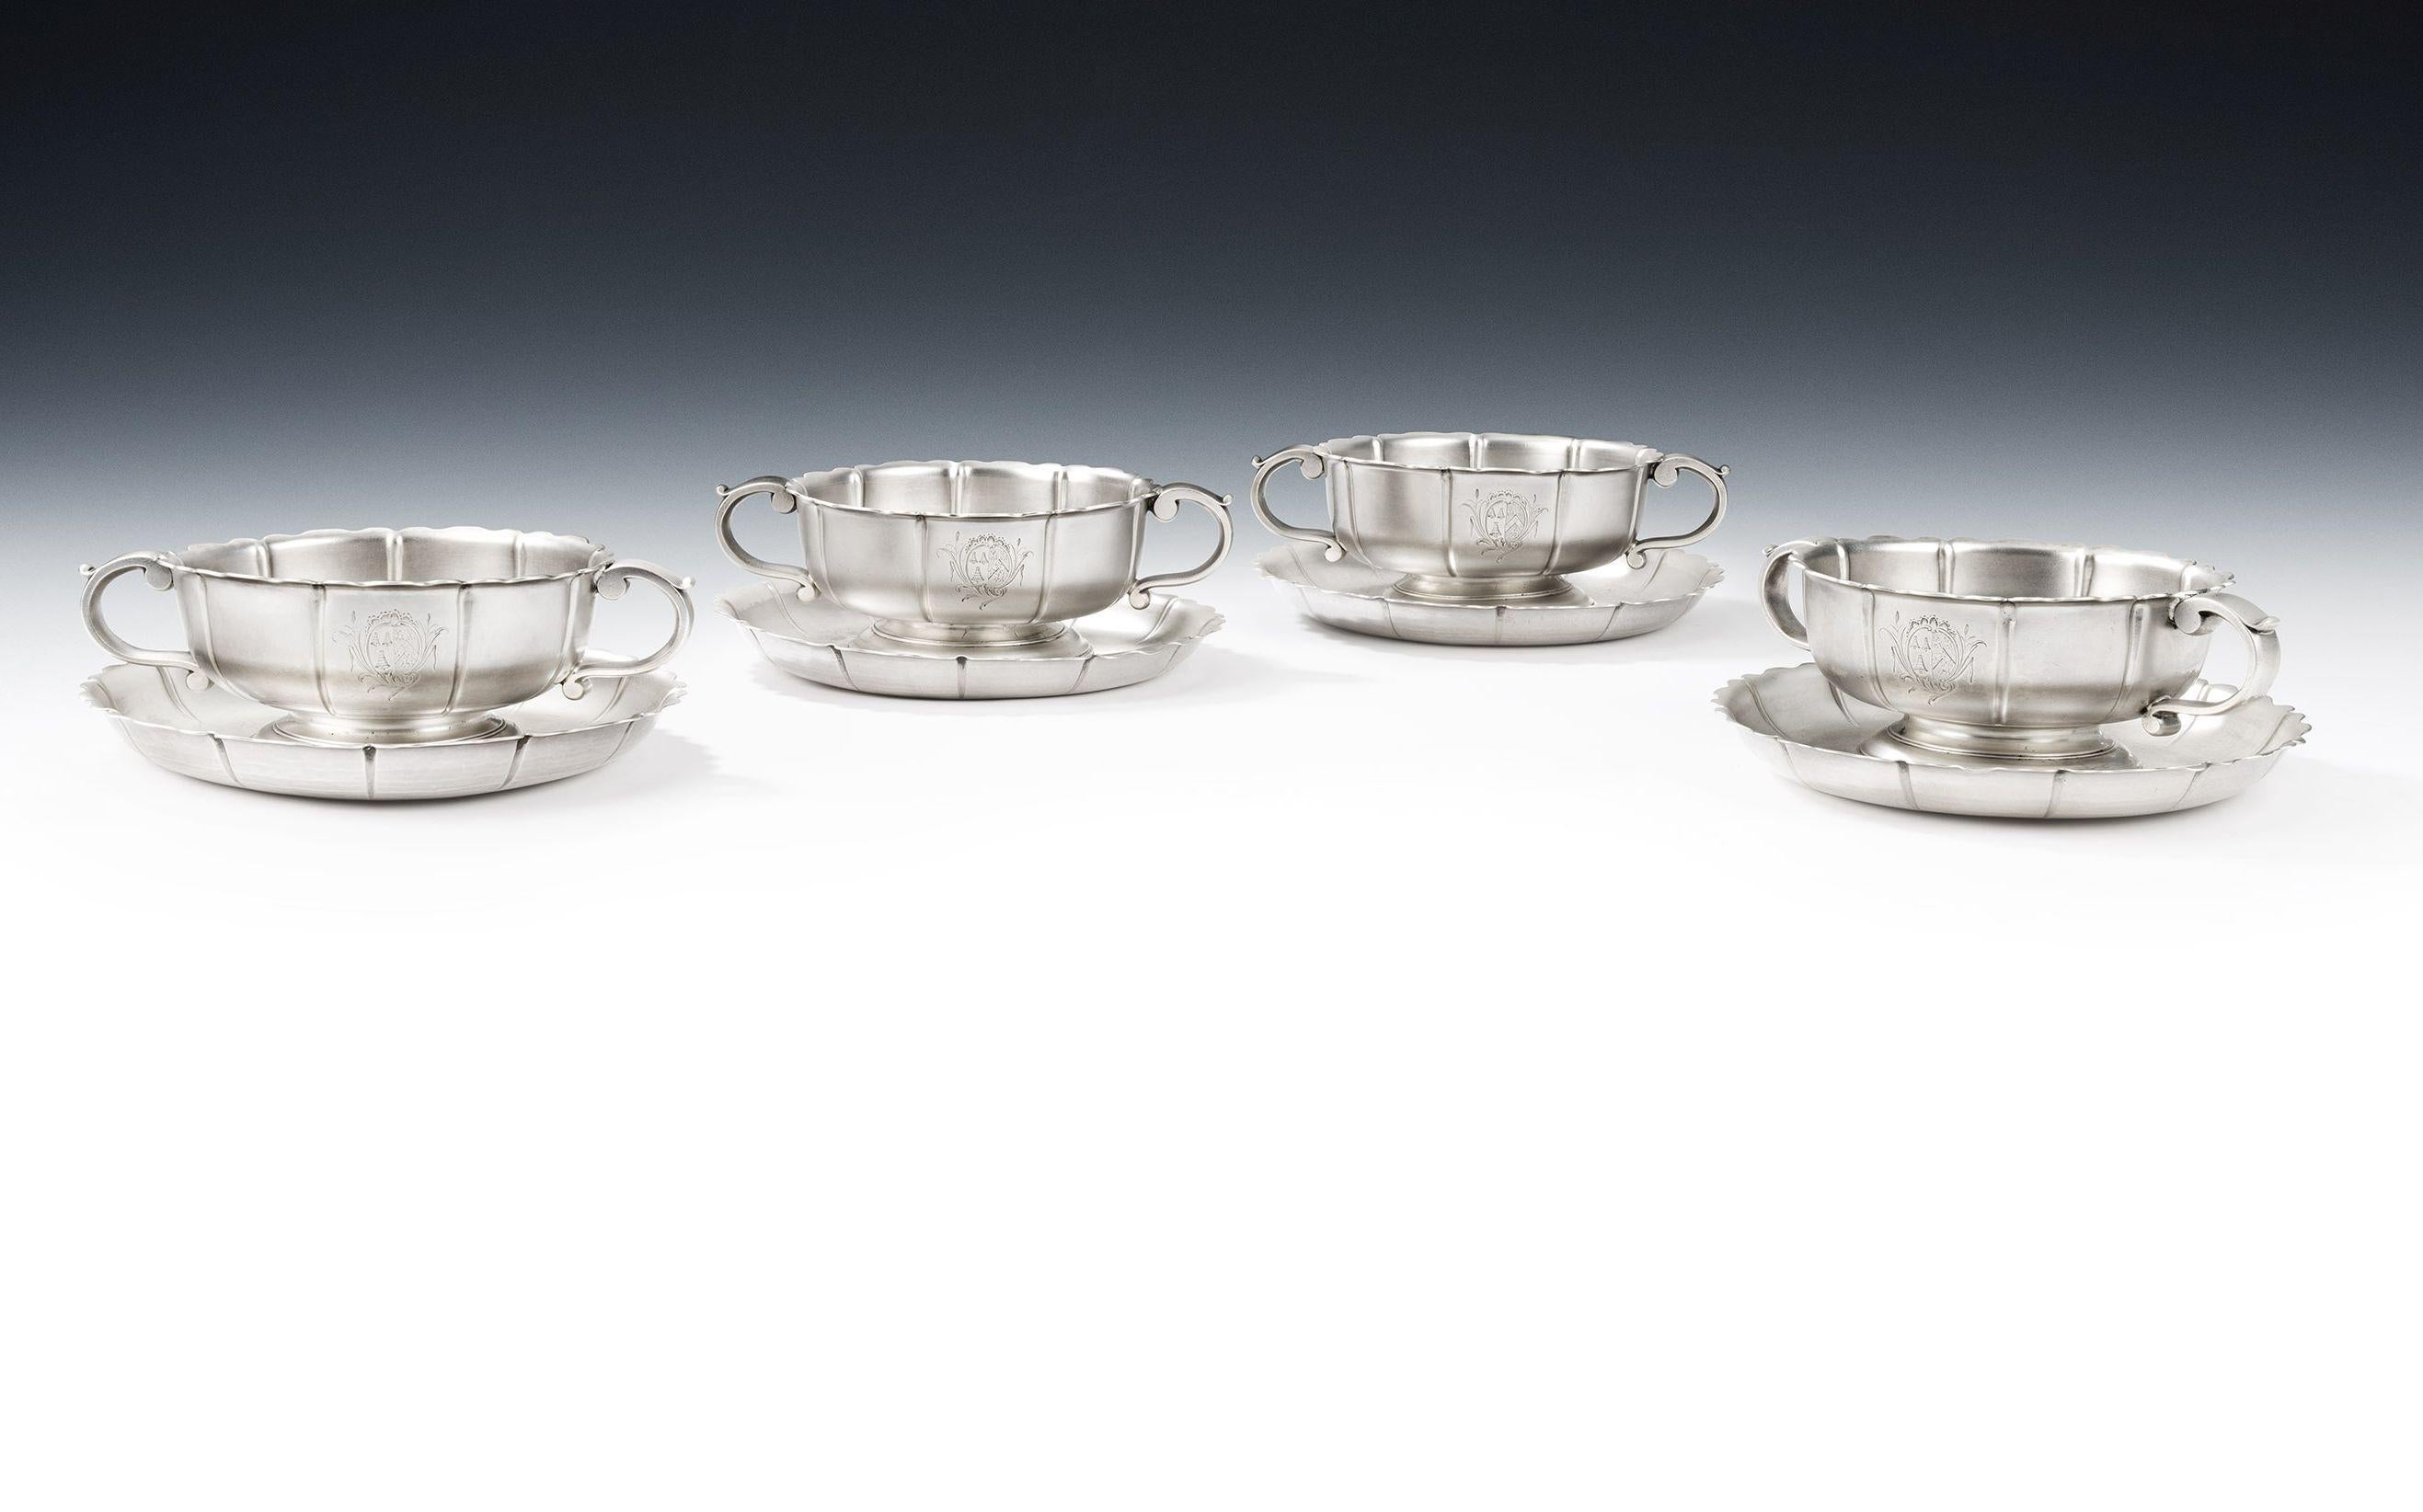 William Wordsworth Interest. An Important Set of Four George II Fruit Bowls and Stands Made in London in 1751/52 by Samuel Herbert & Co.

To find a single fruit bowl and stand, from this period, is very unusual, however to find a set of four is